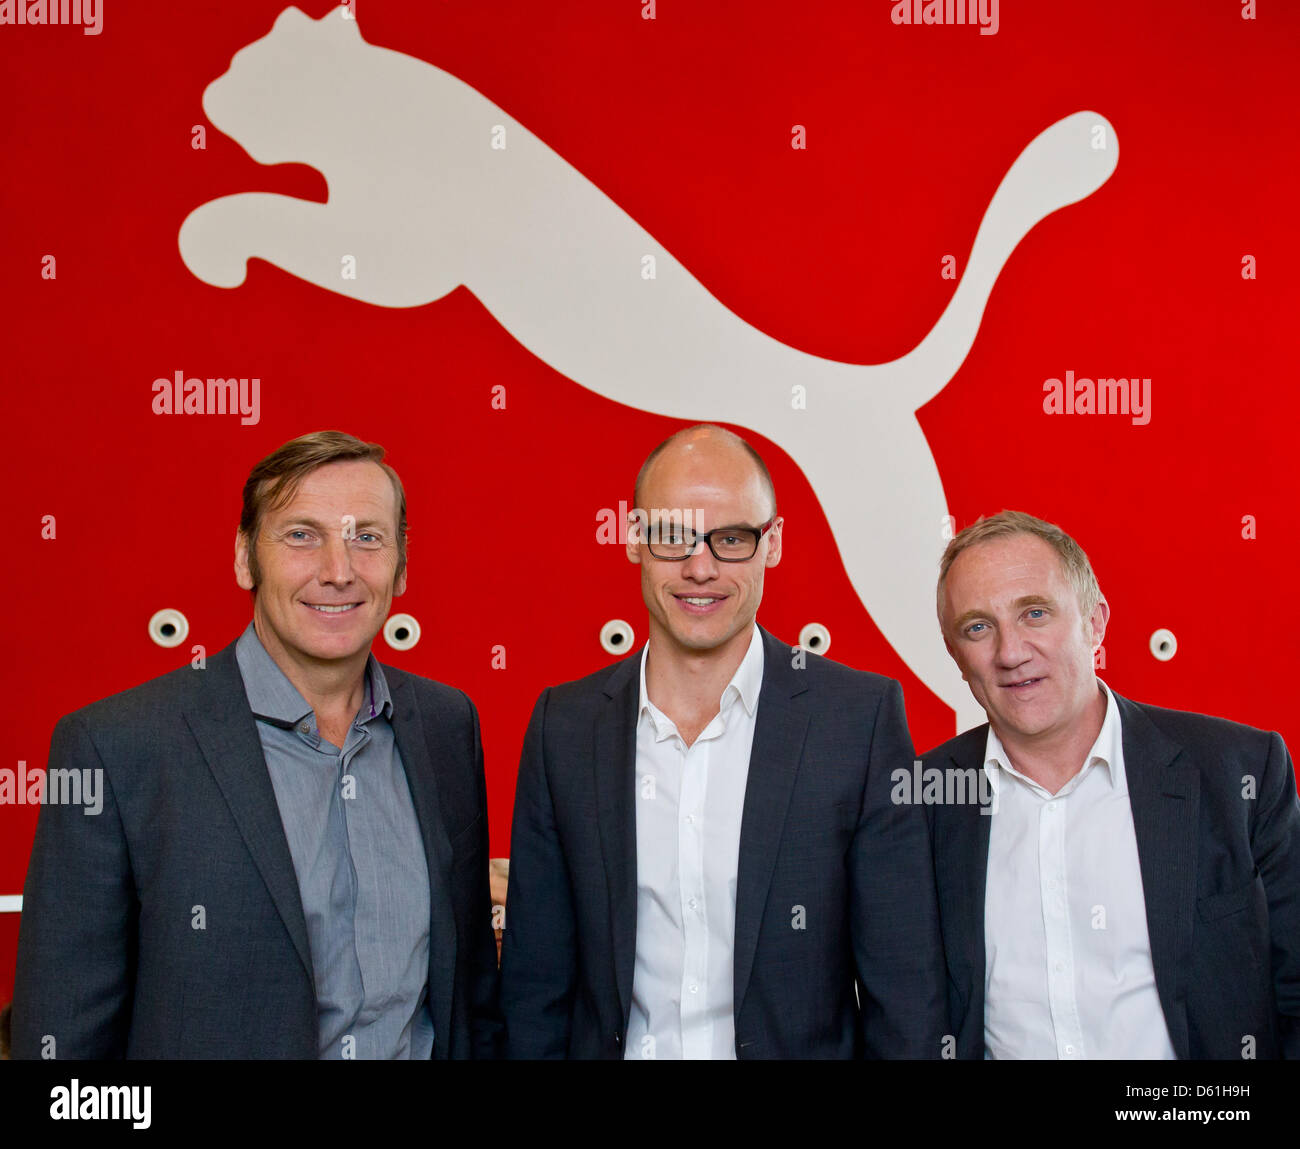 Franz Koch (C), executive director of the sportswear manufacturer Puma,  Jochen Zeitz (L), chairman of the supervisory board of Puma, and  Francois-Henri Pinault, deputy chairman of the supervisory board of Puma,  stand